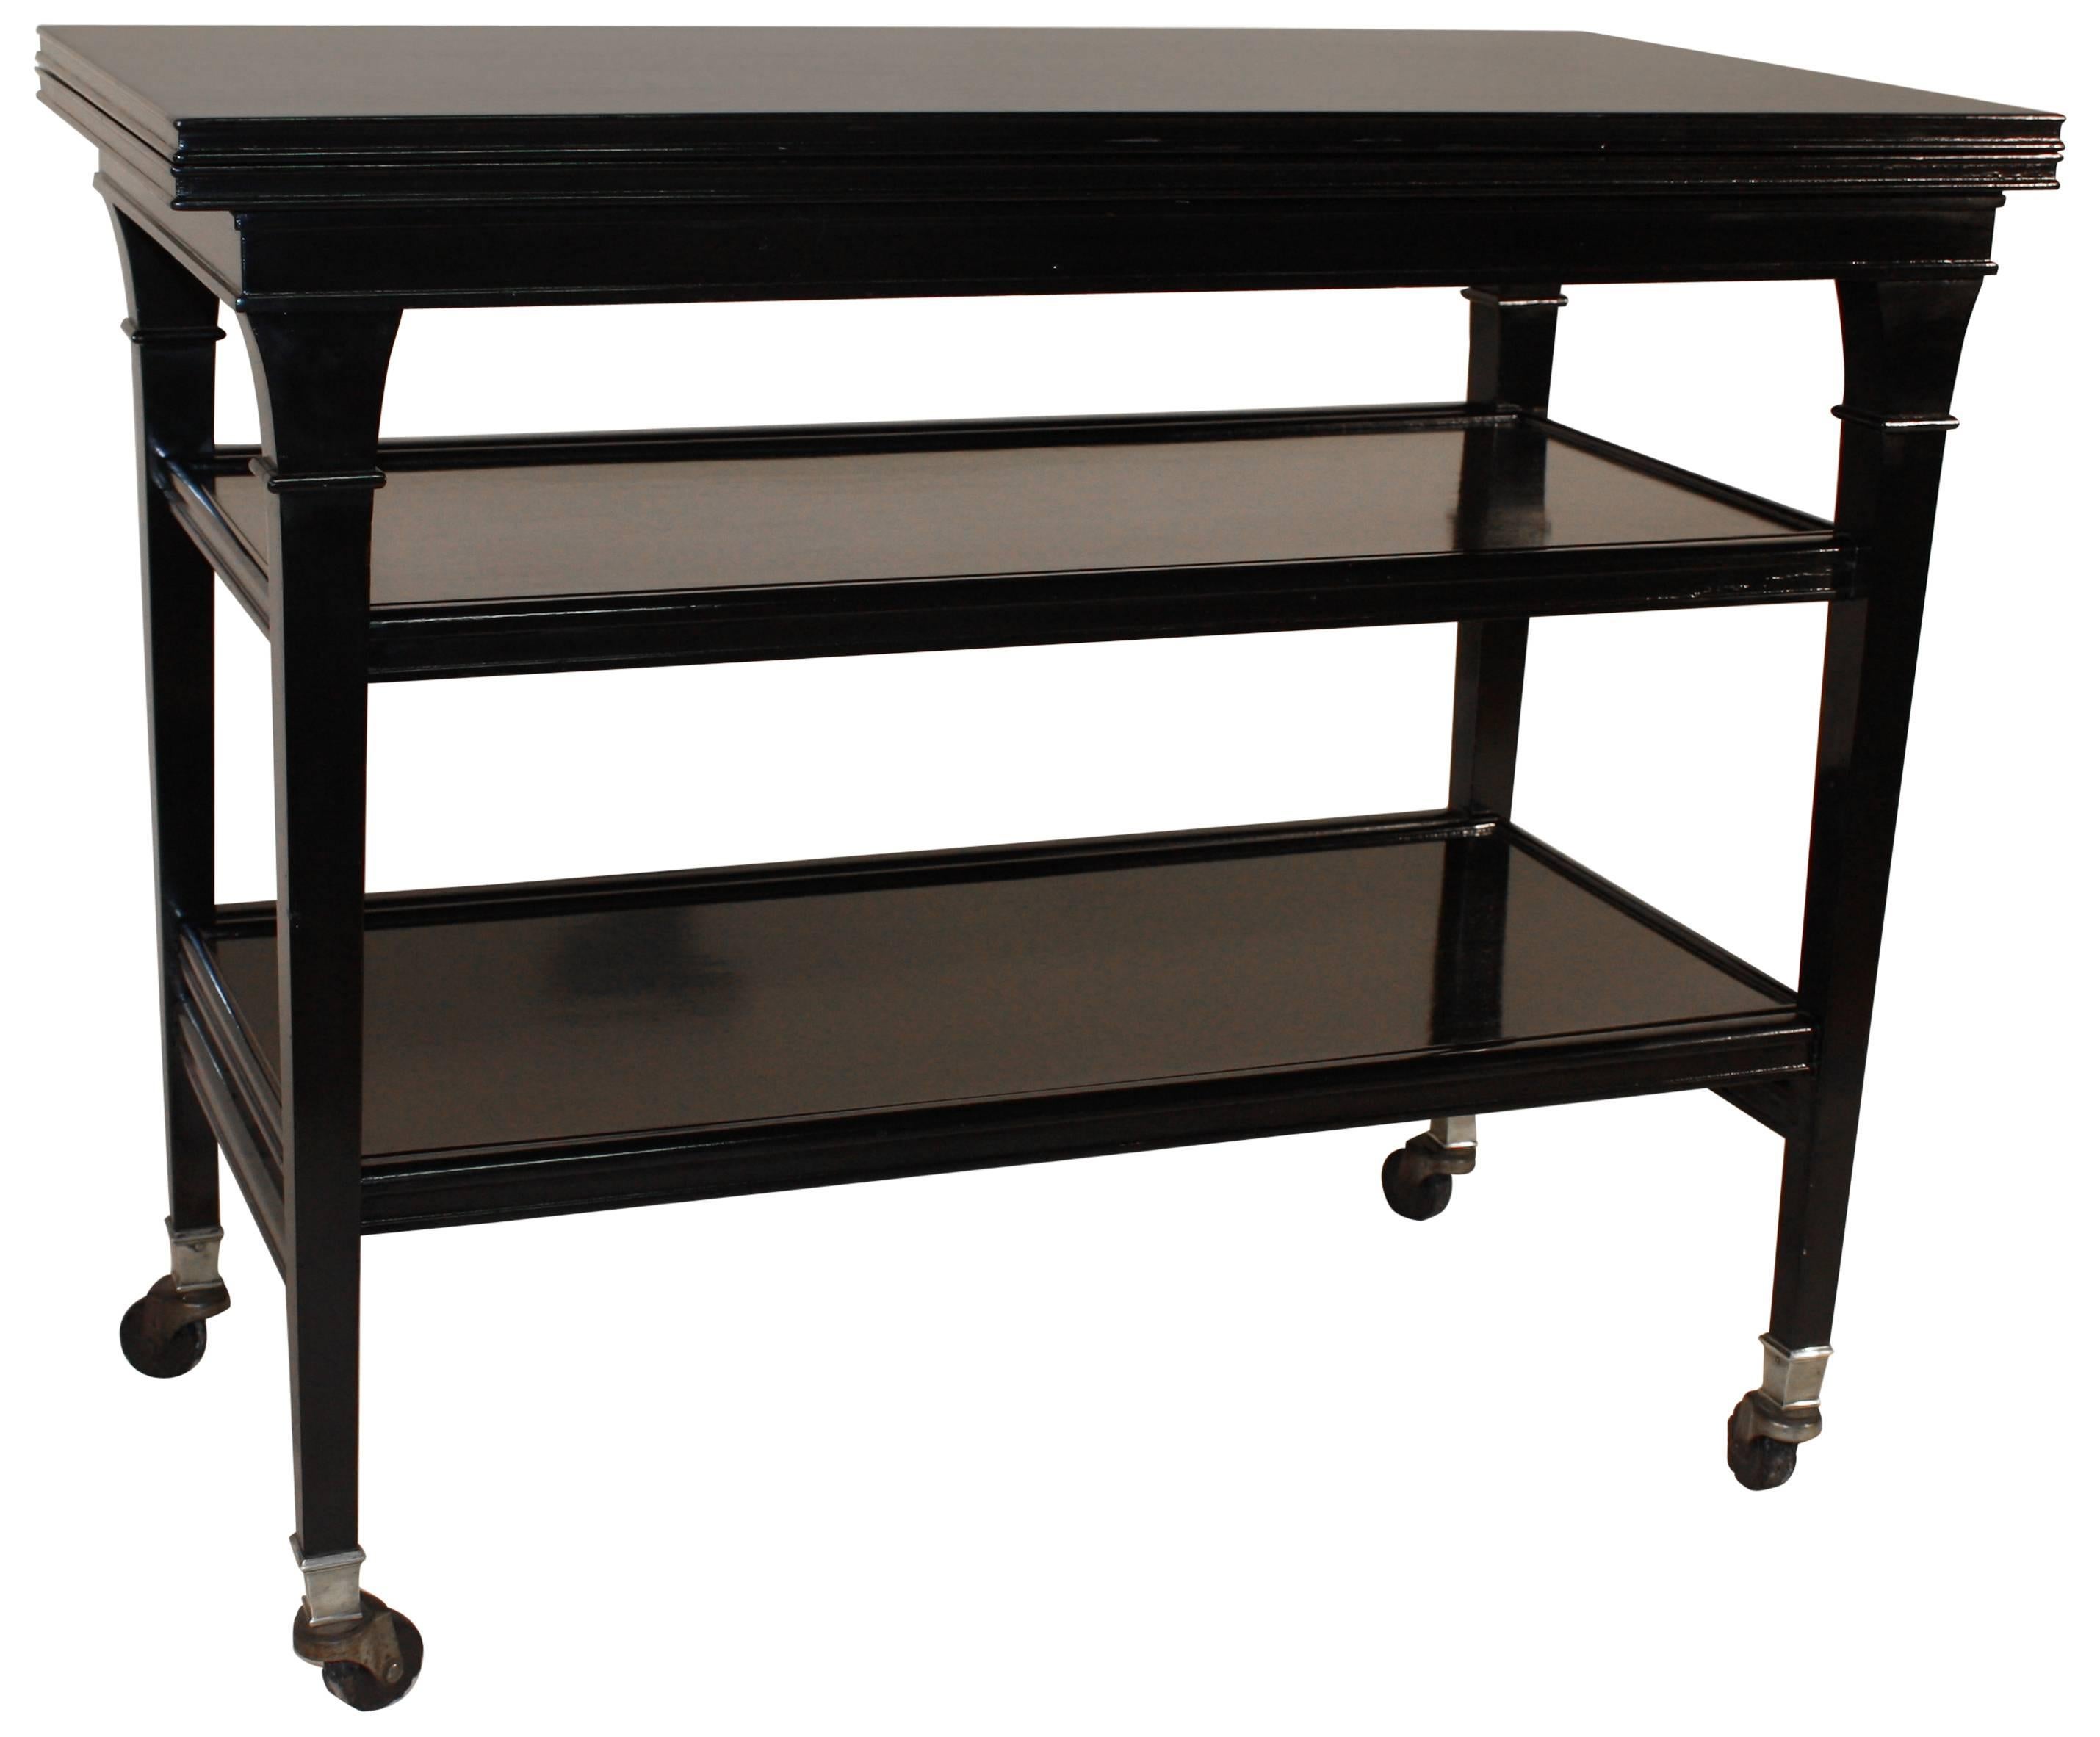 1940s Black Lacquer Serving Cart, Breakfast Table